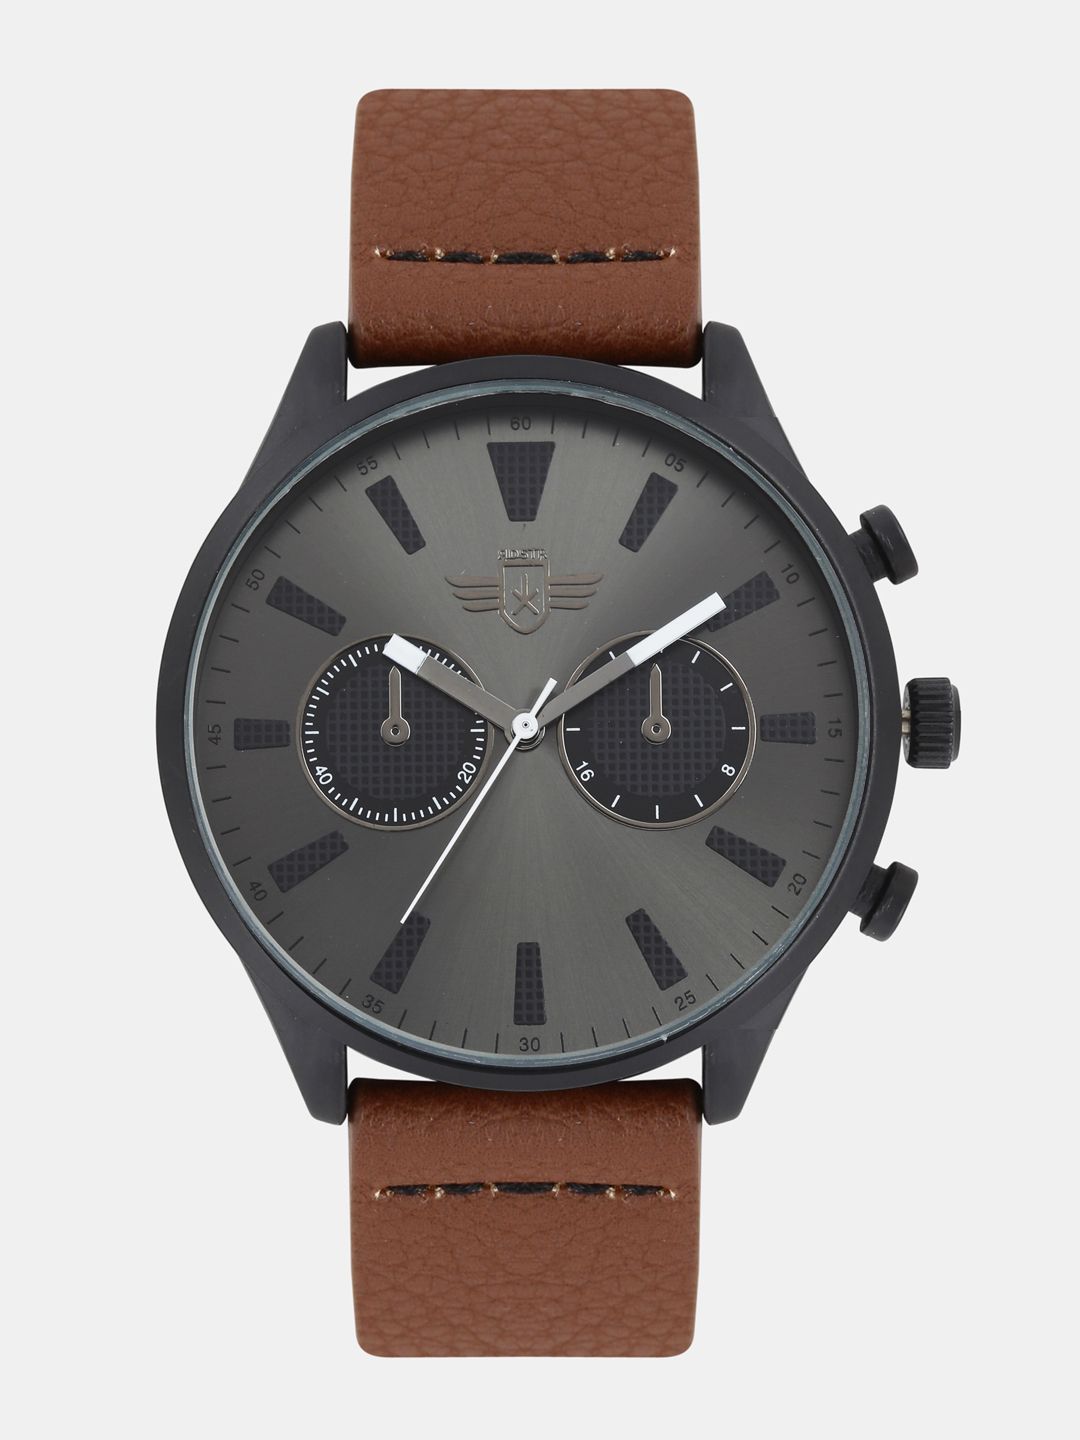 Roadster Unisex Gunmetal-Toned Analogue Watch Price in India